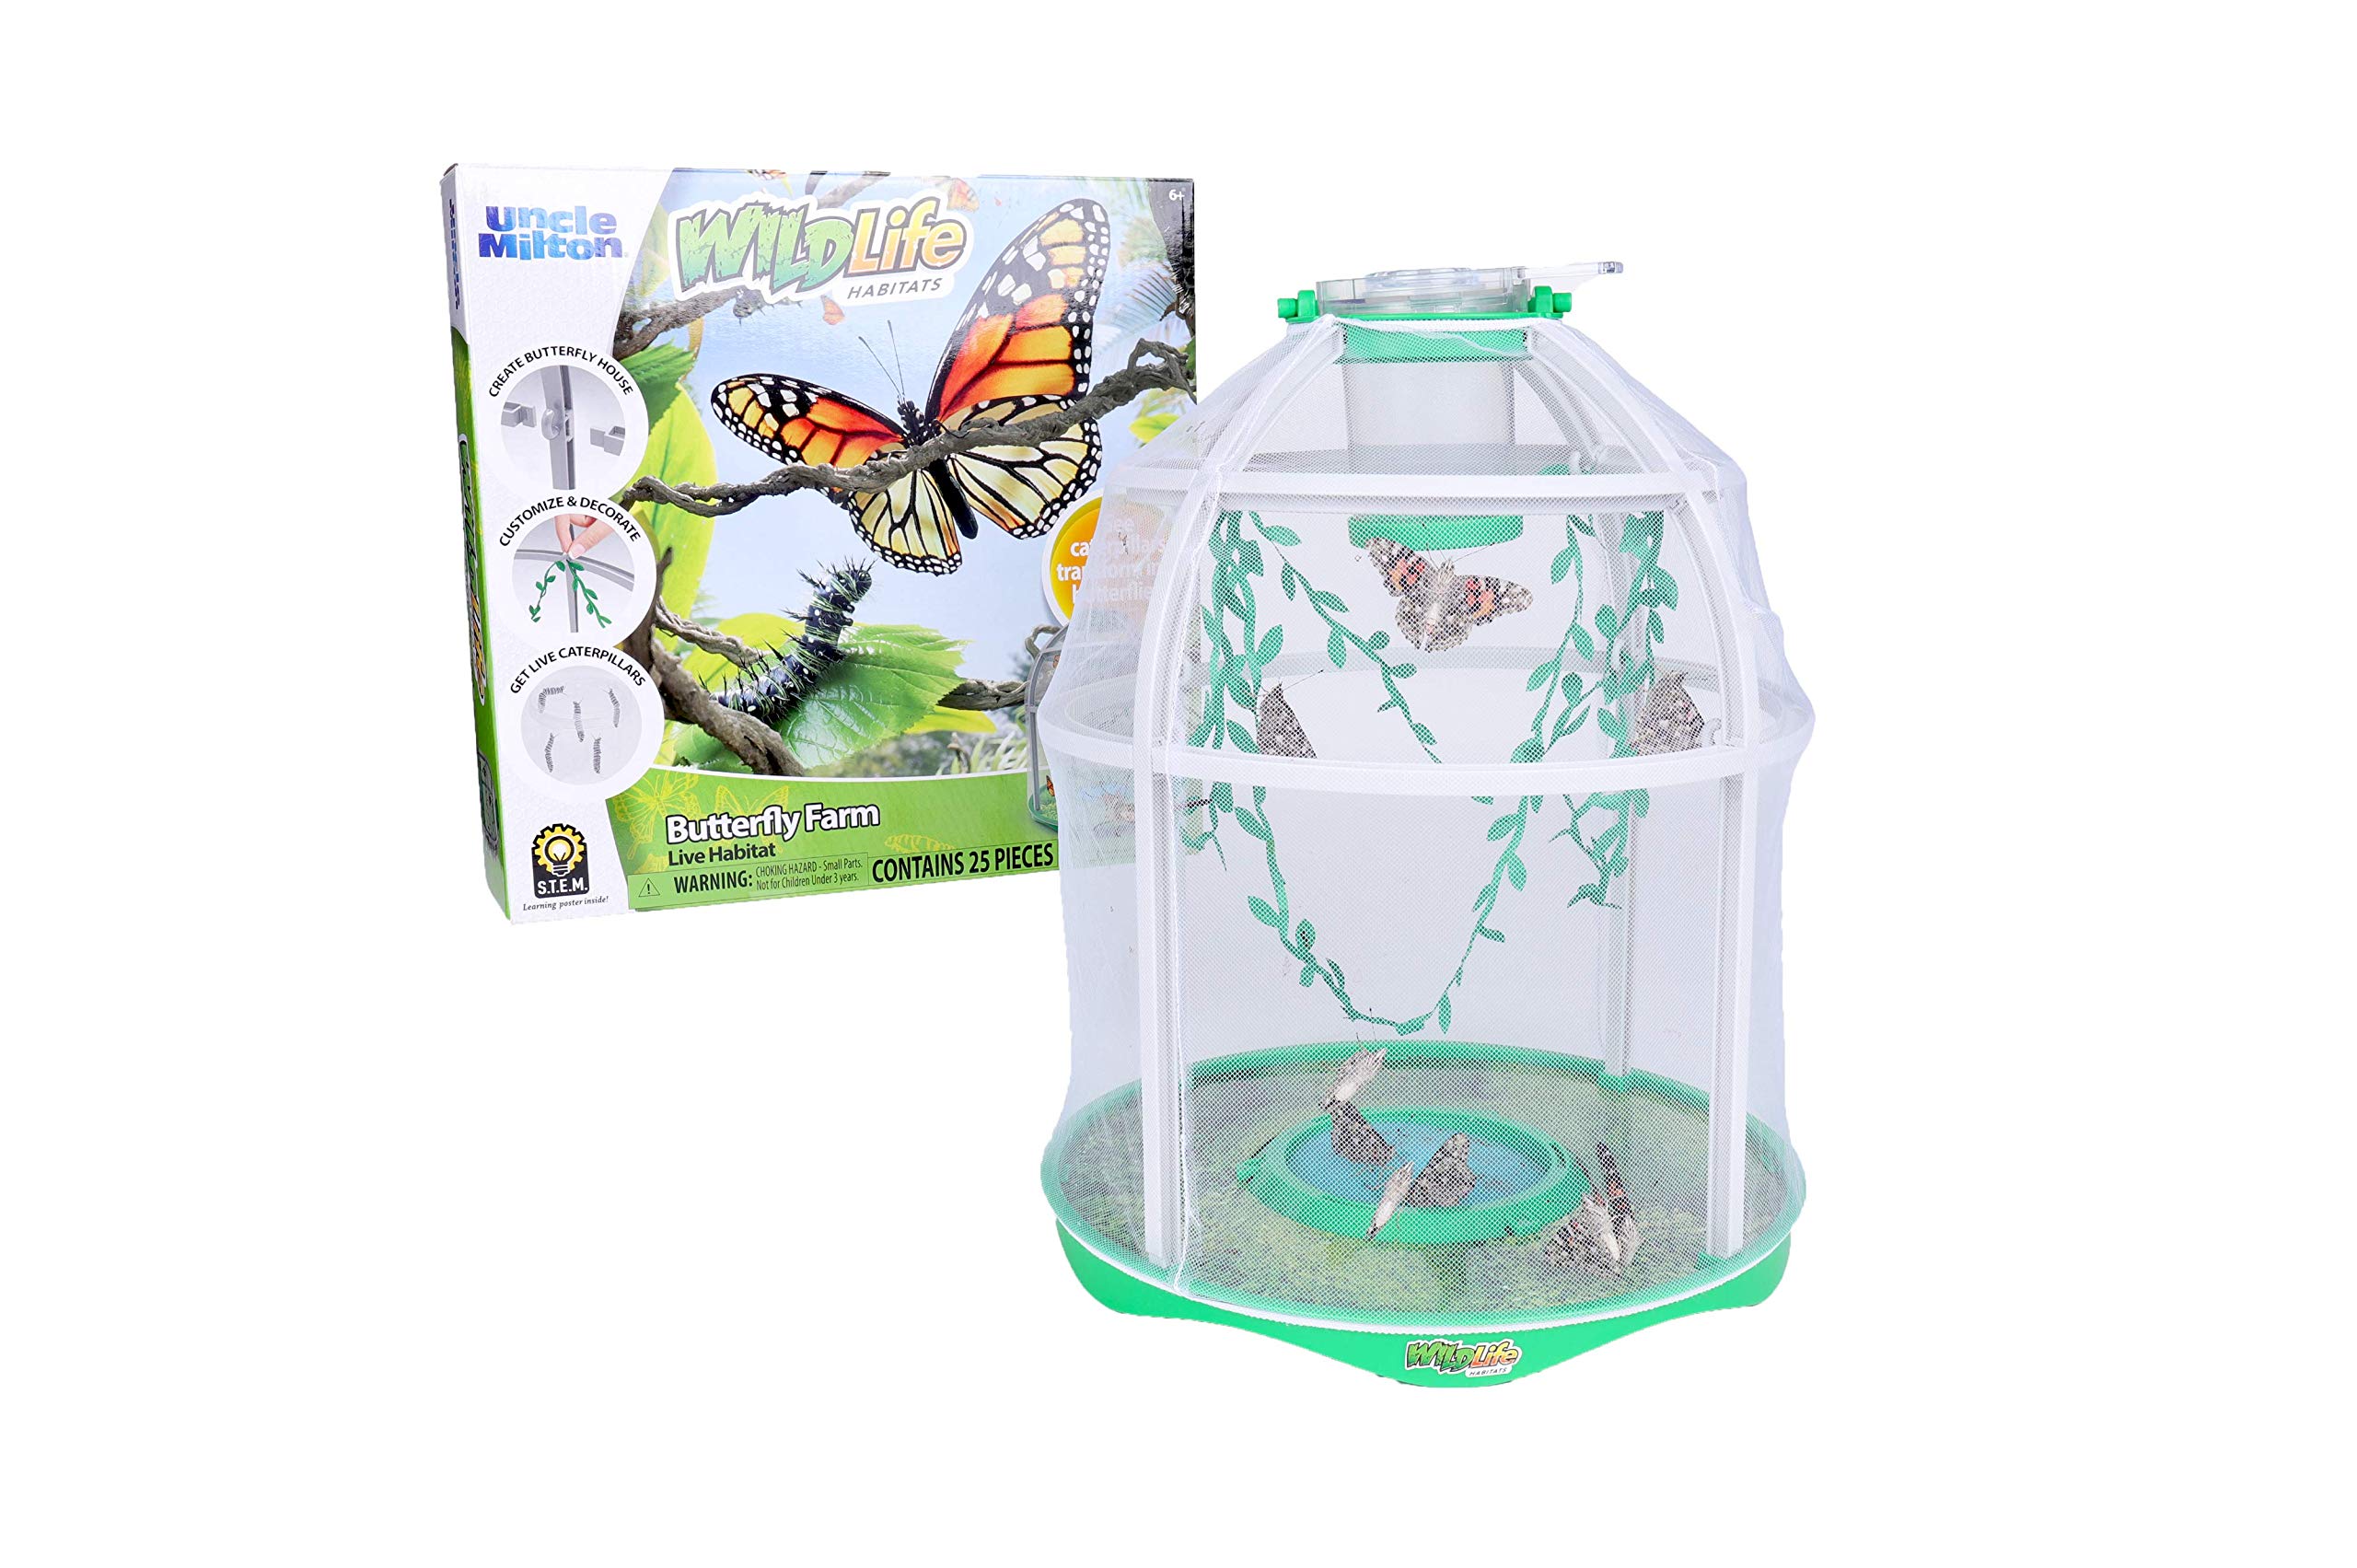 Uncle Milton Butterfly Farm Live Habitat - Observe Butterfly Lifecycle in Garden – Includes Voucher to Redeem for Caterpillars